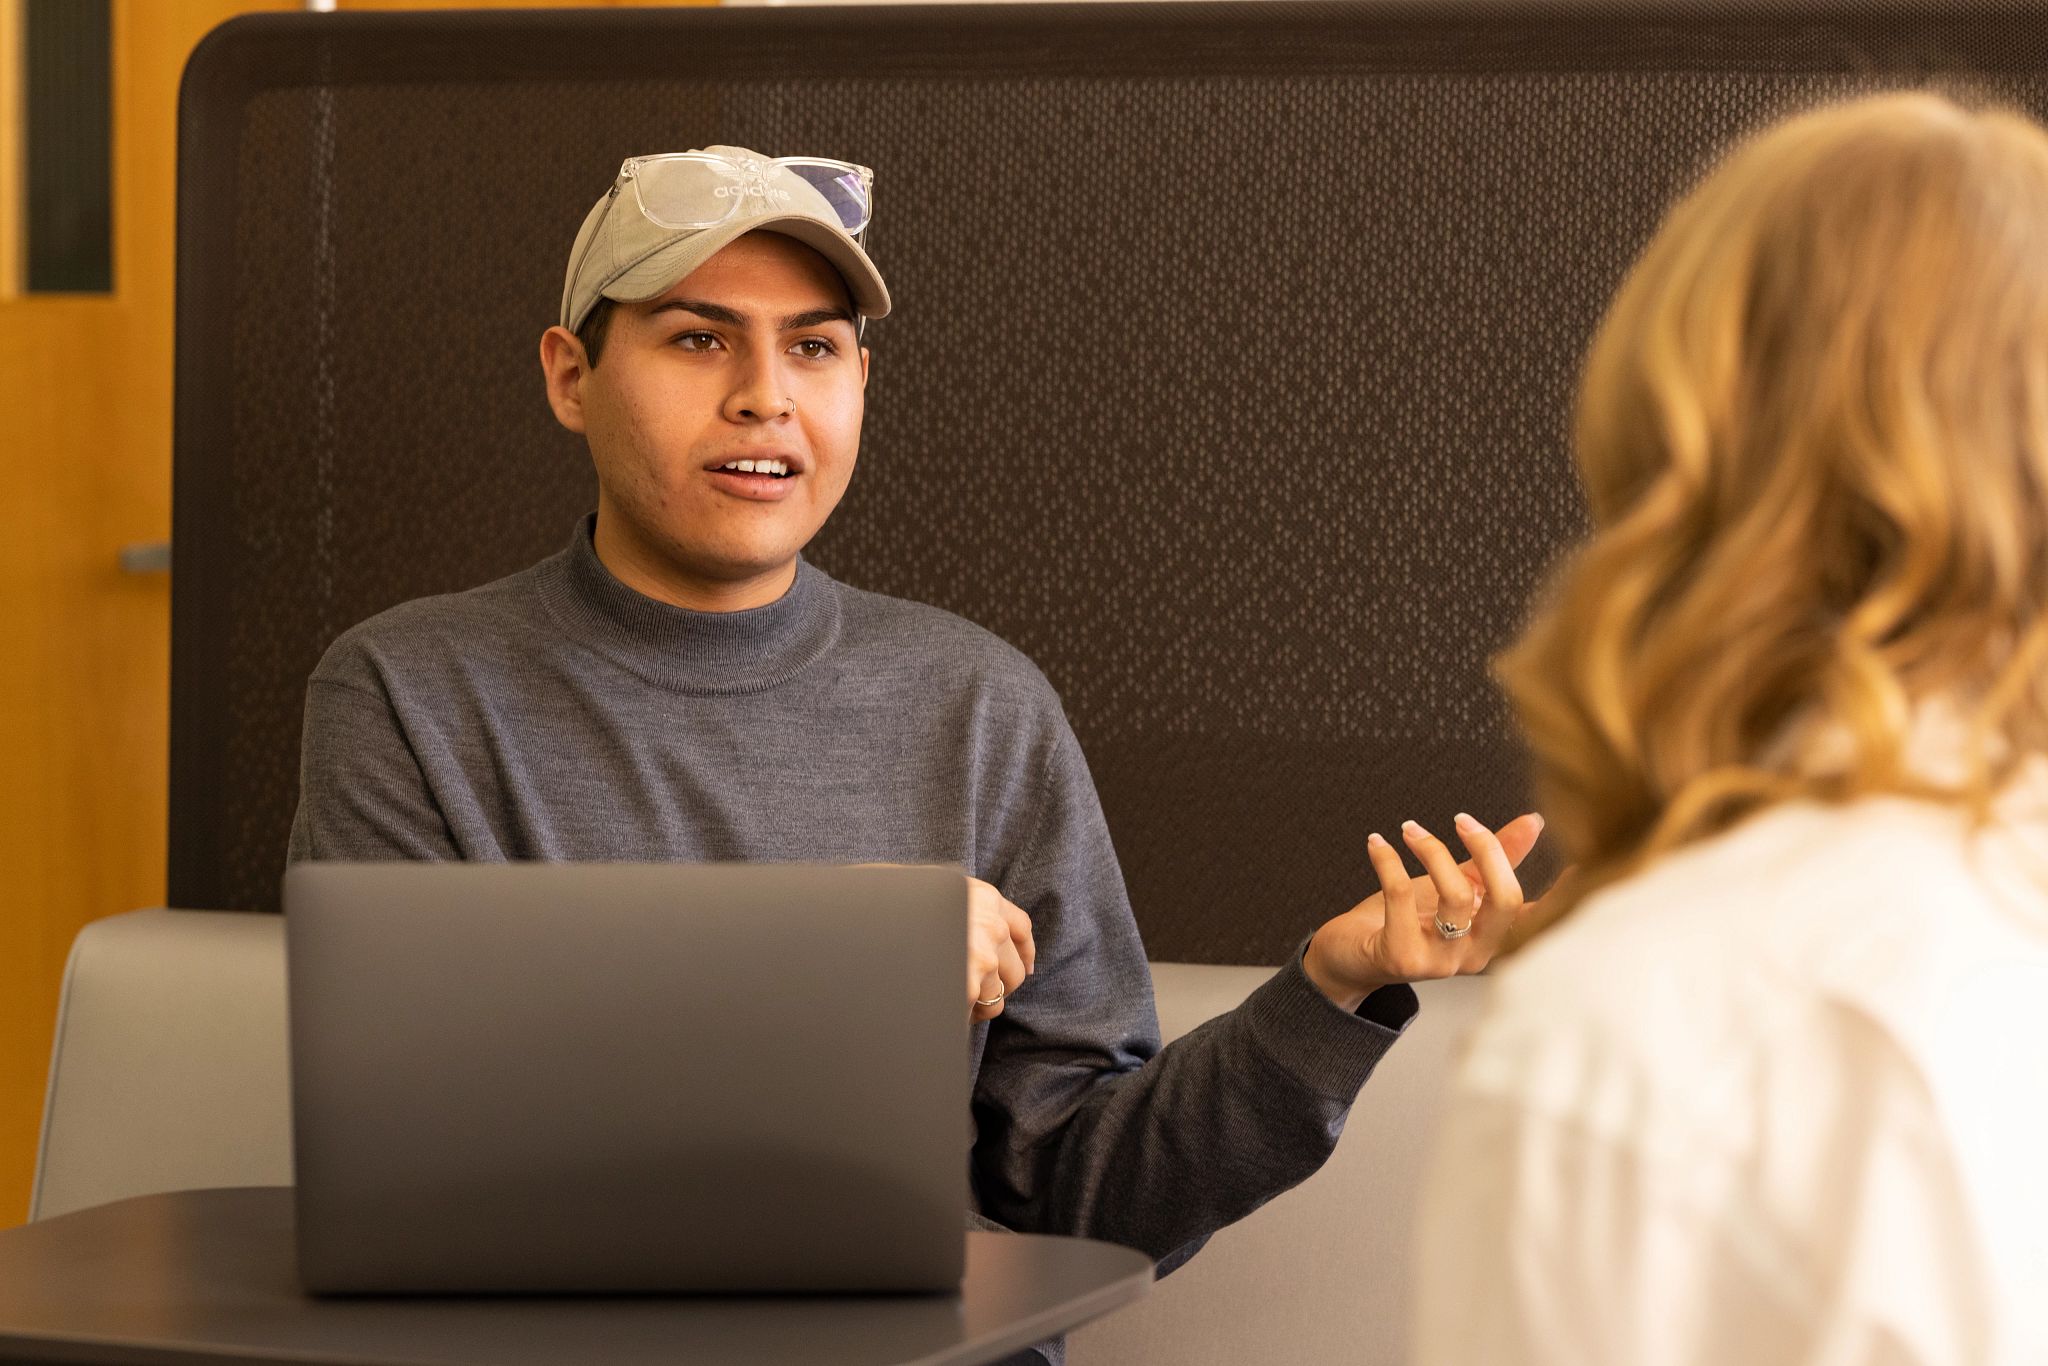 Biomedical sciences student Andres Huerta talking with colleague.